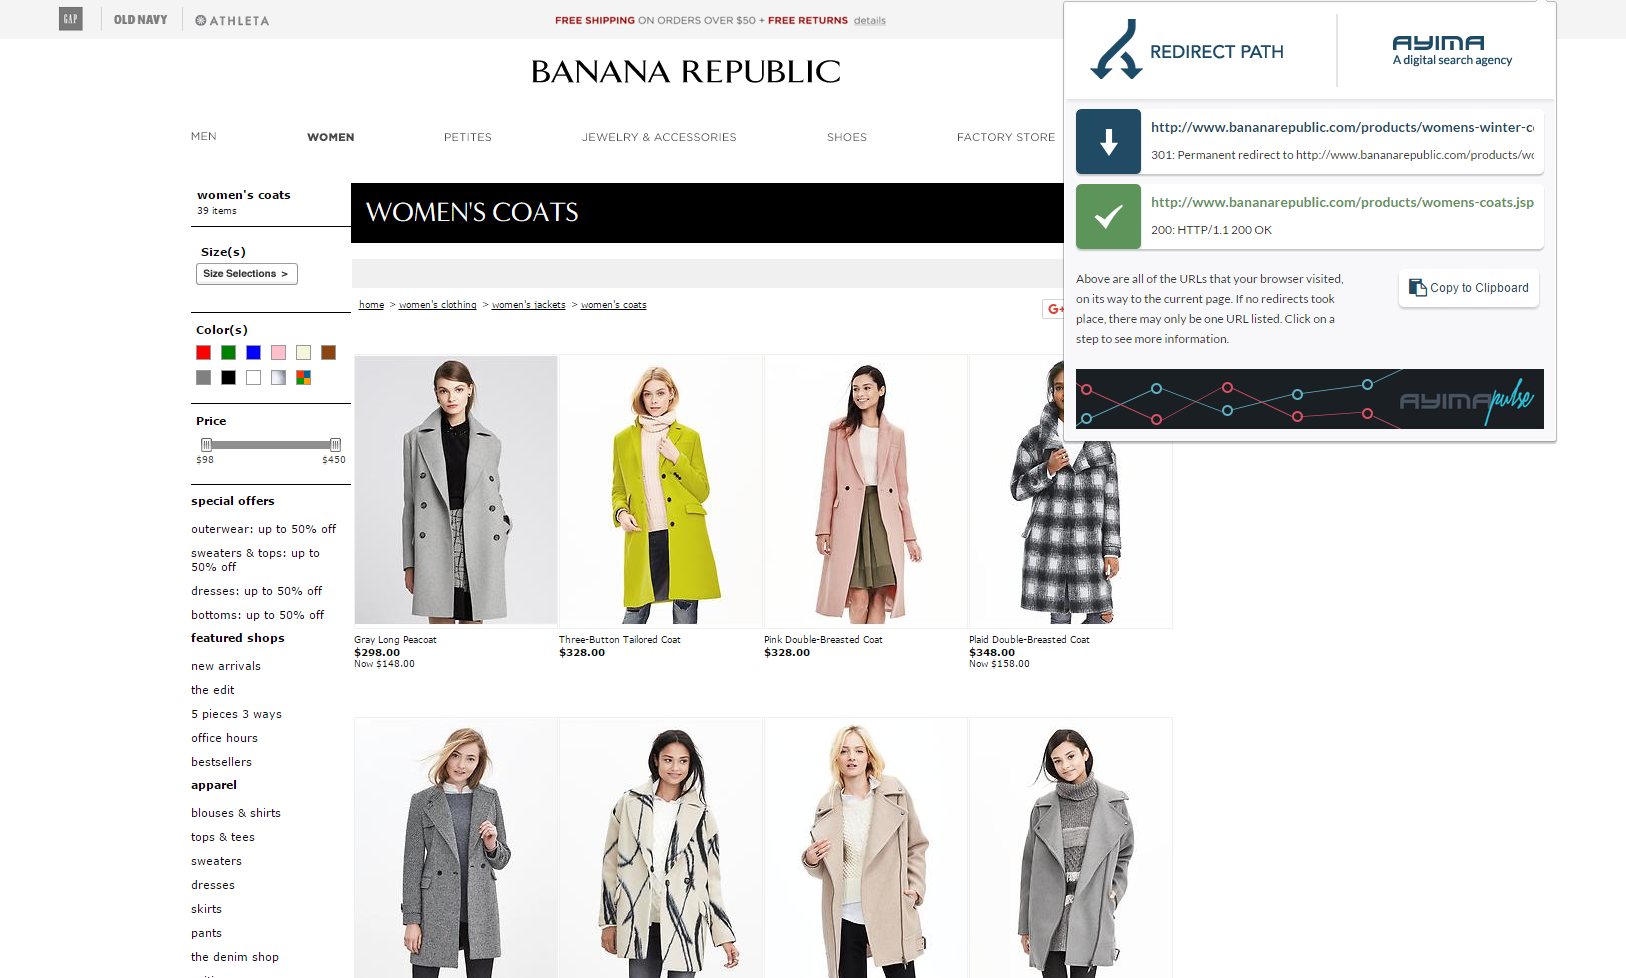 Duplicate structure and theming limiting visibility for Gap, Old Navy and Banana Republic